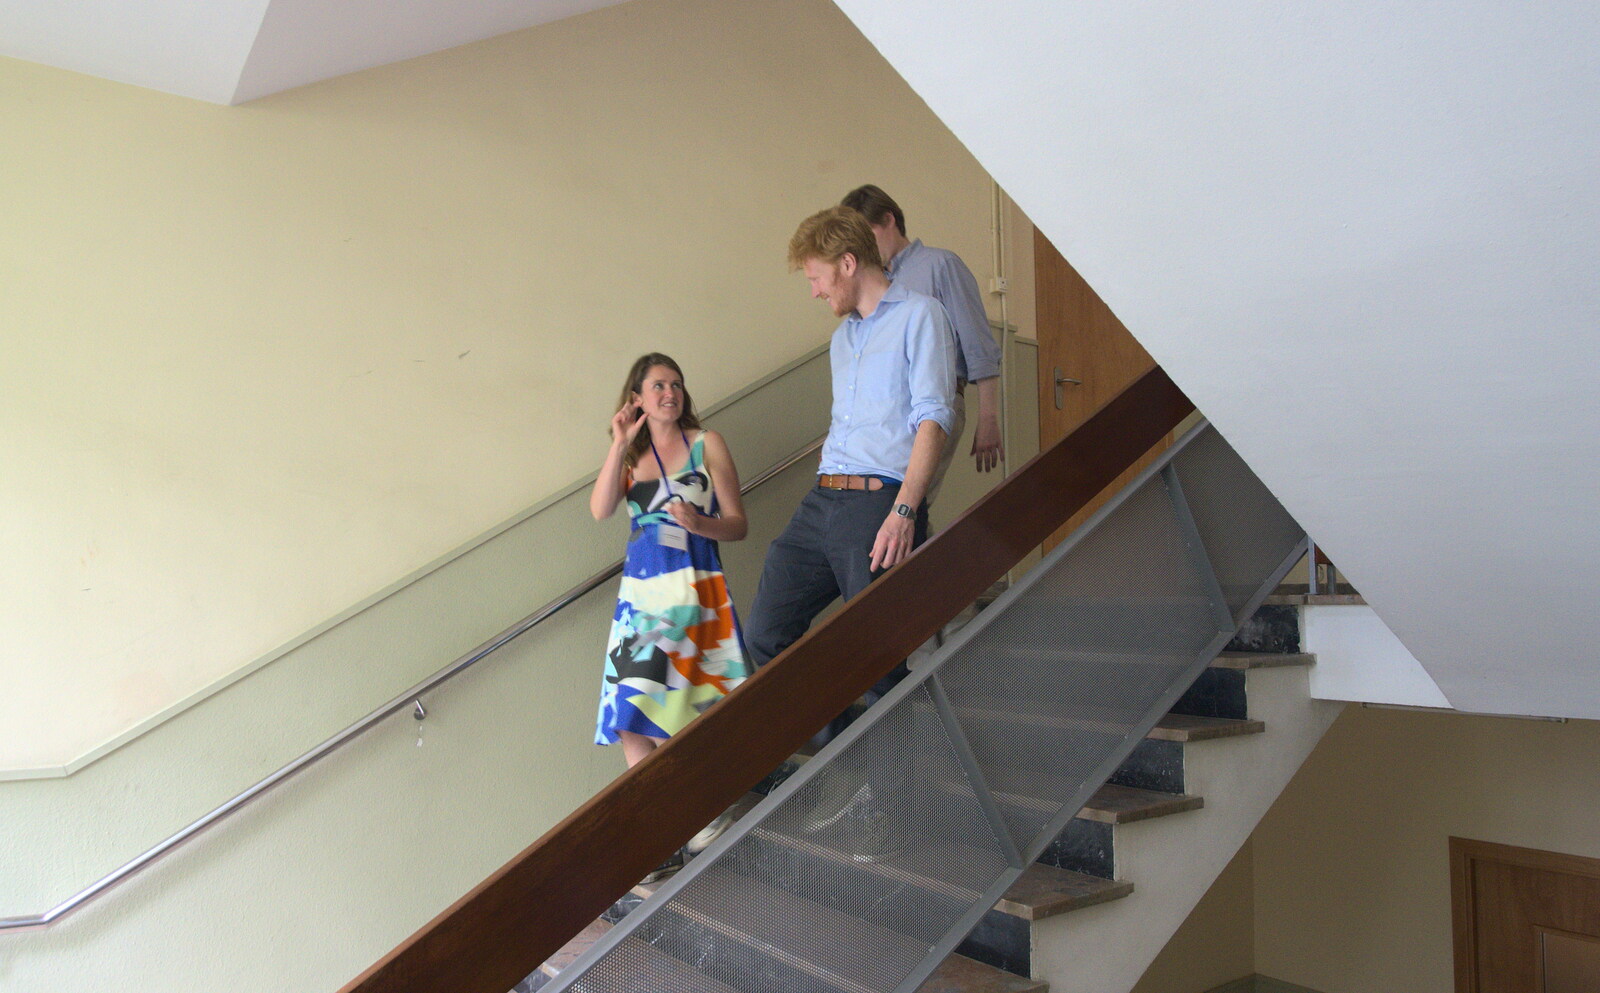 Isobel on the stairs from The Open Education Challenge, Barcelona, Catalonia - 13th July 2014